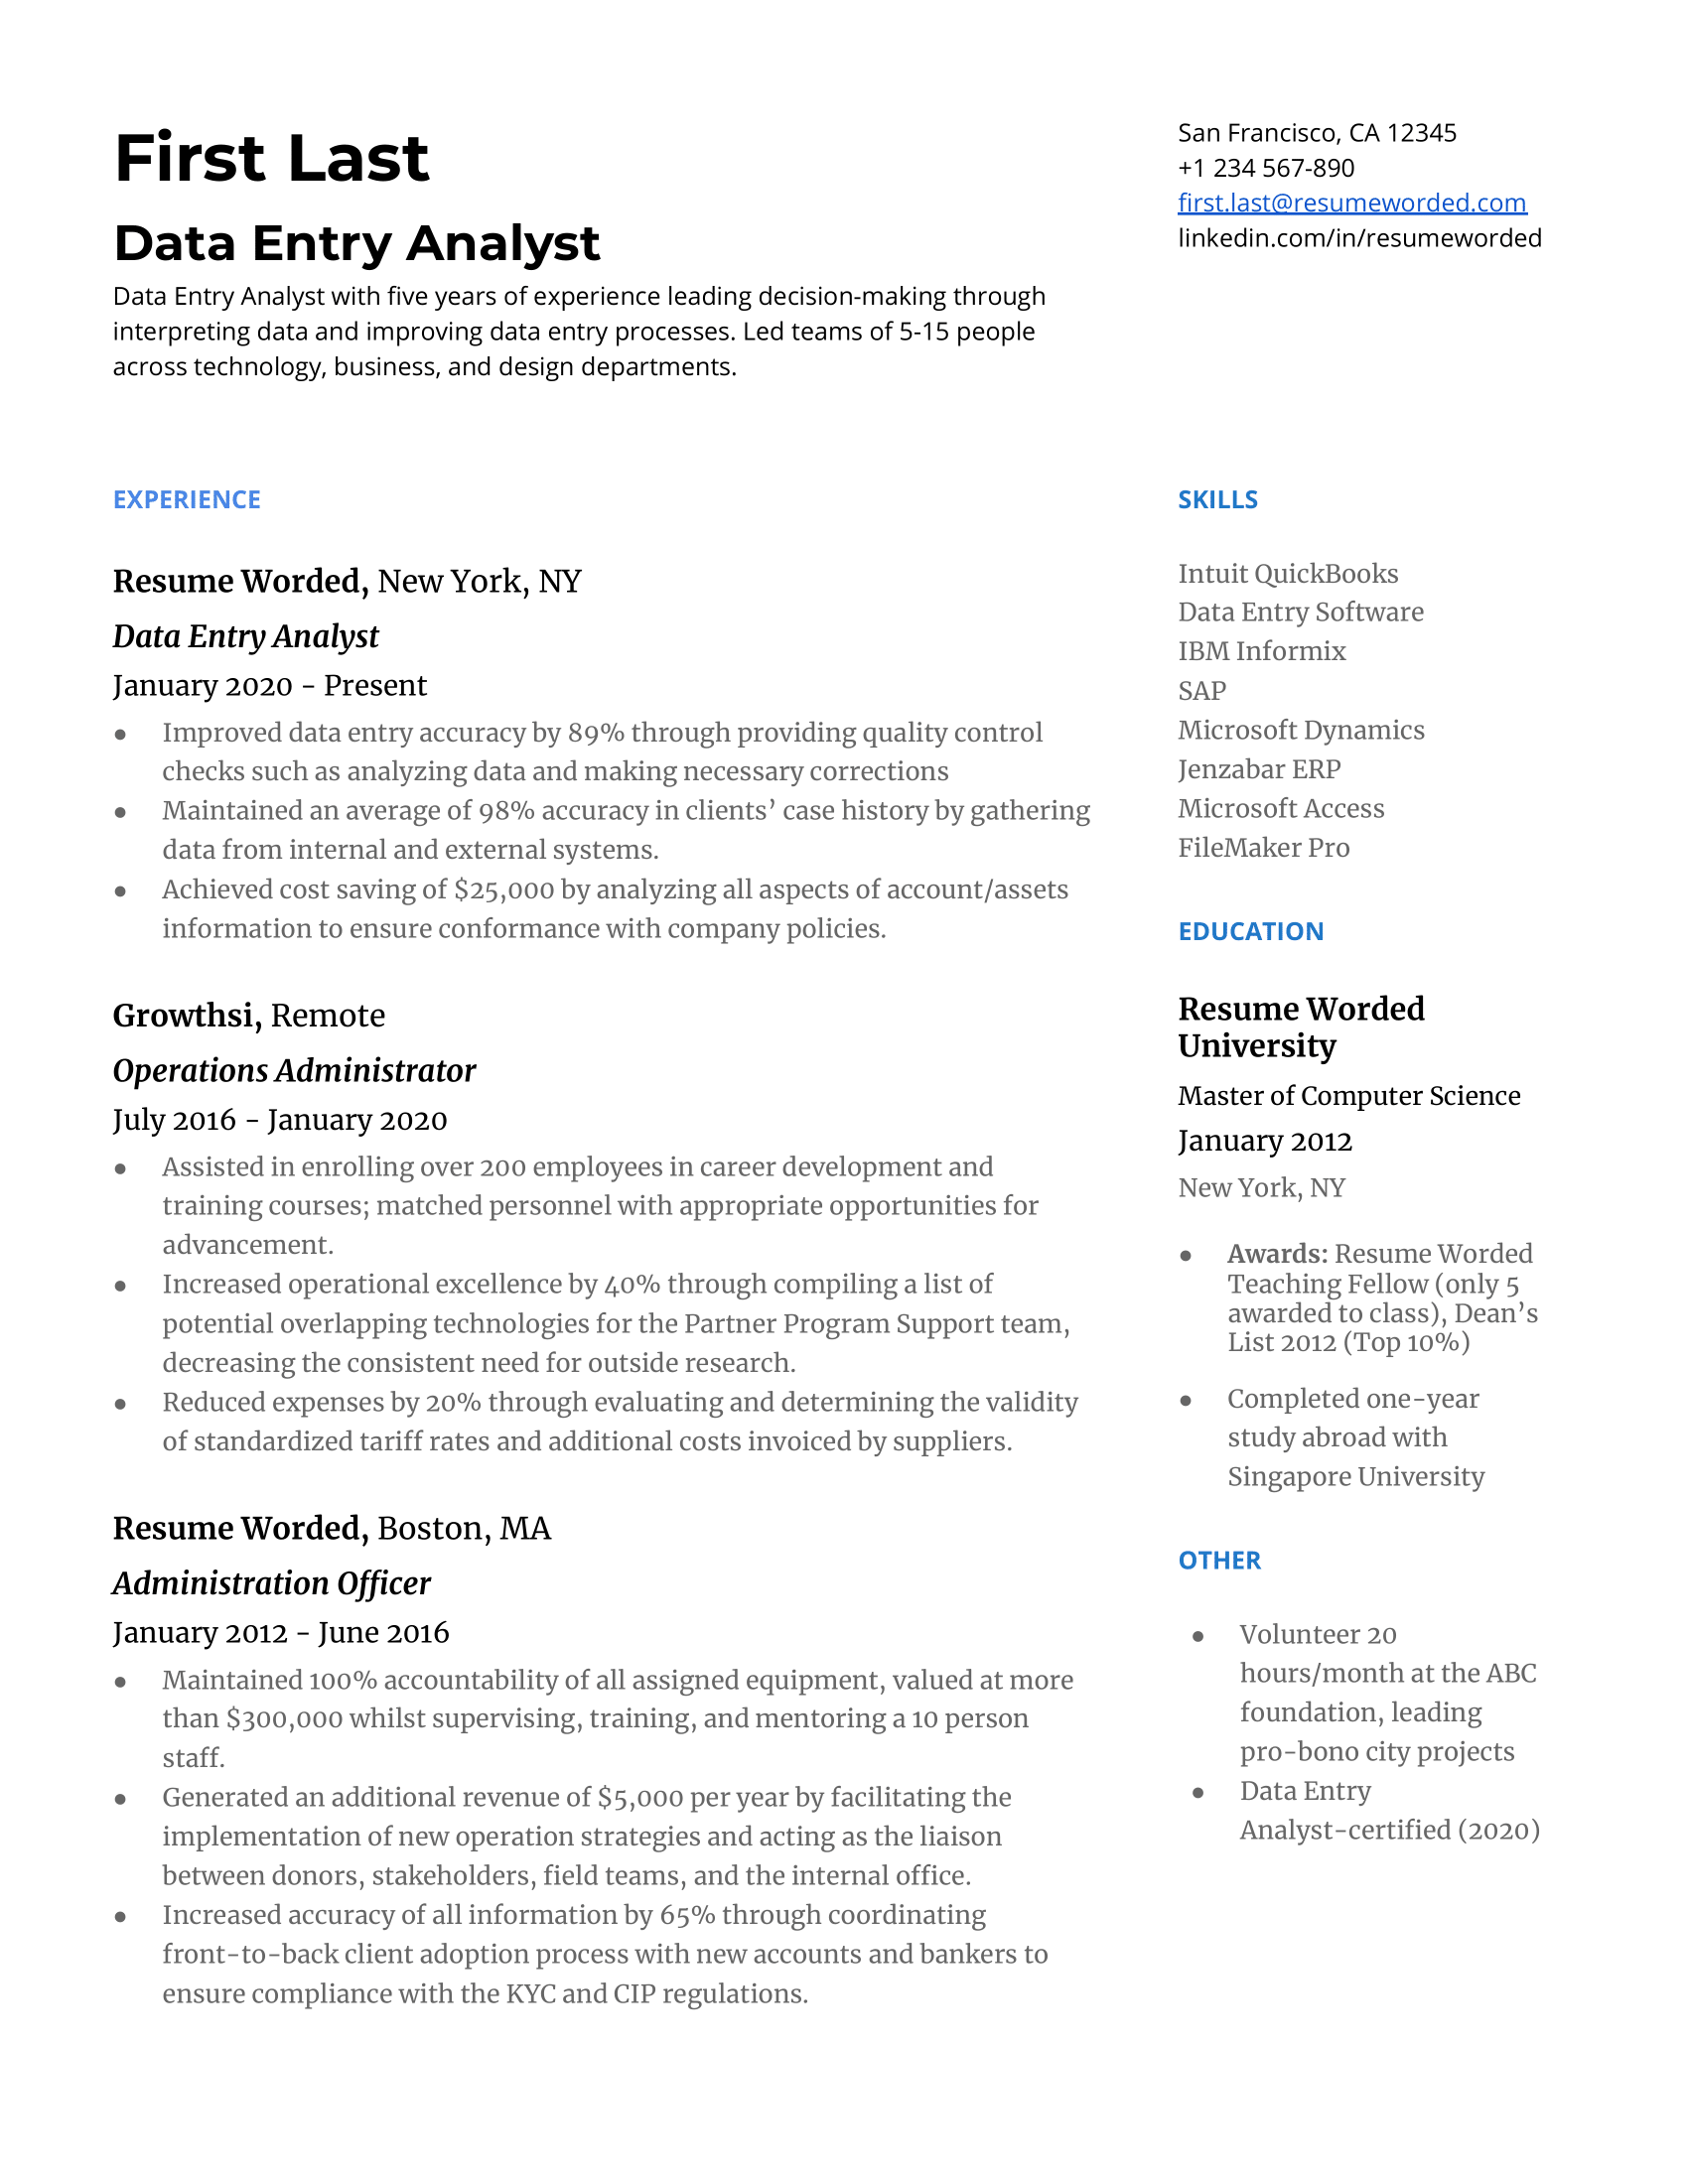 Supply Chain Manager Resume Example For 2022 Resume Worded